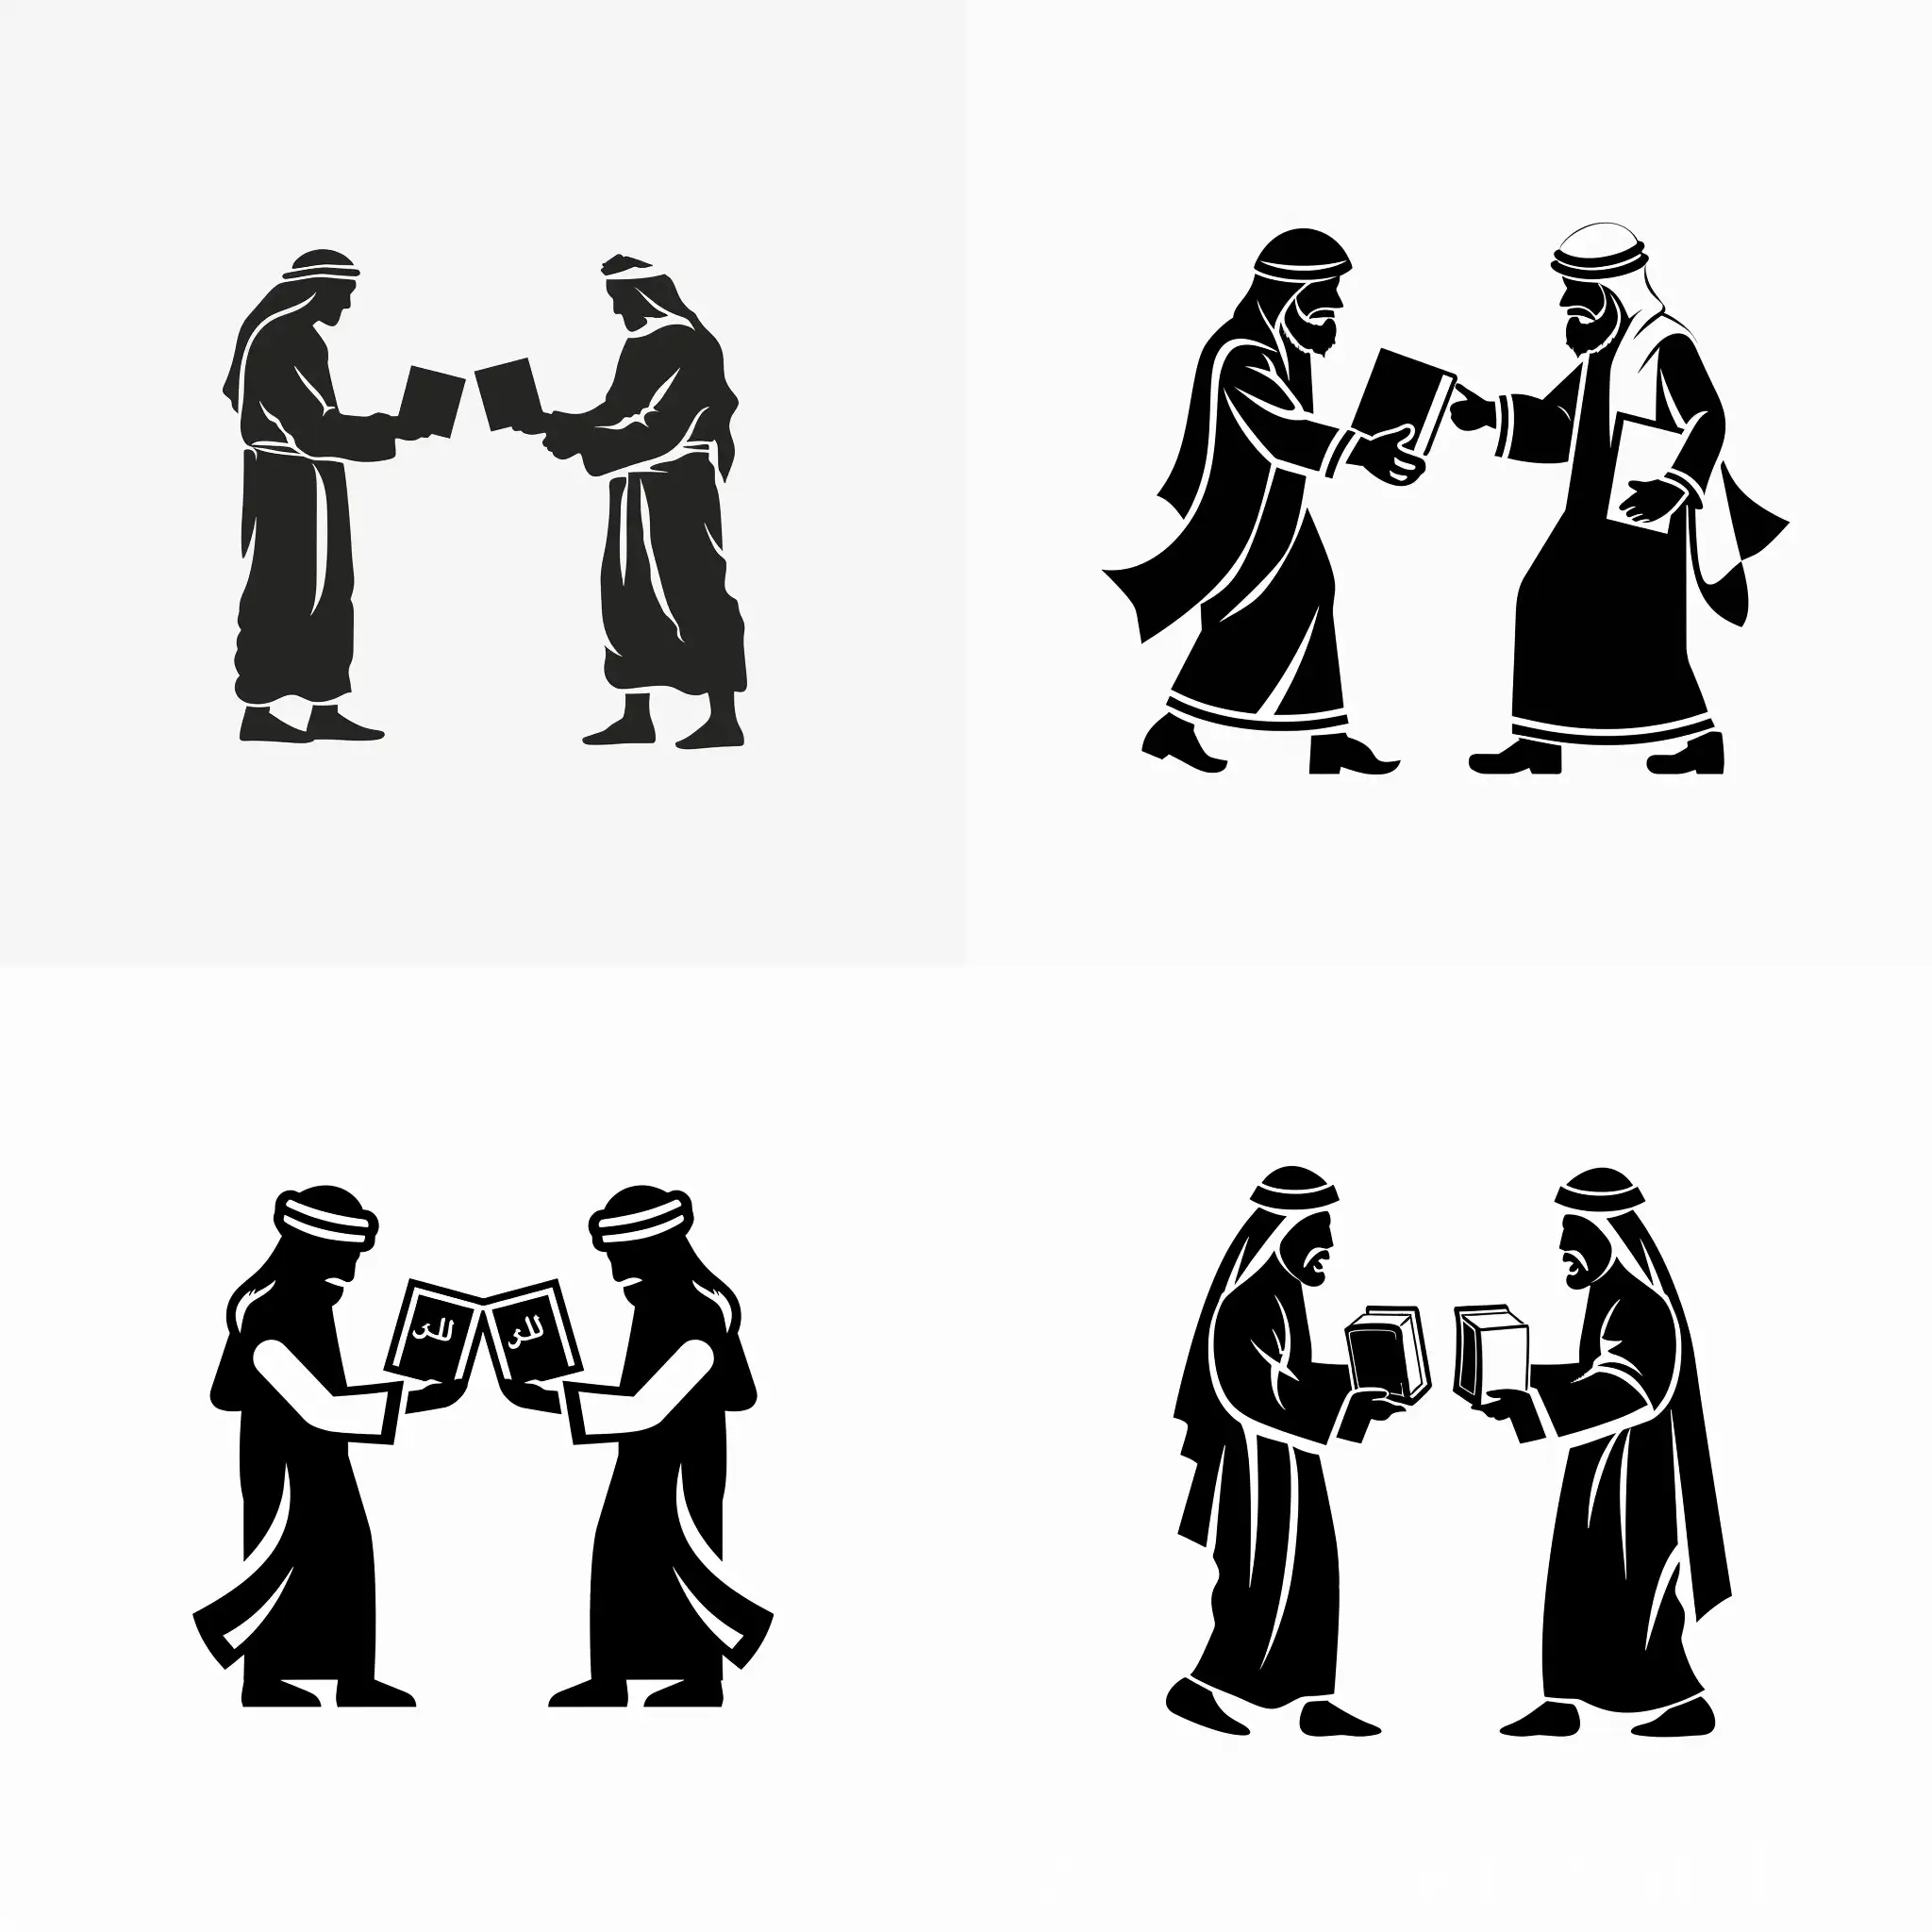 Cultural-Exchange-Minimalistic-Logo-Featuring-Two-Bedouin-Men-Sharing-Books